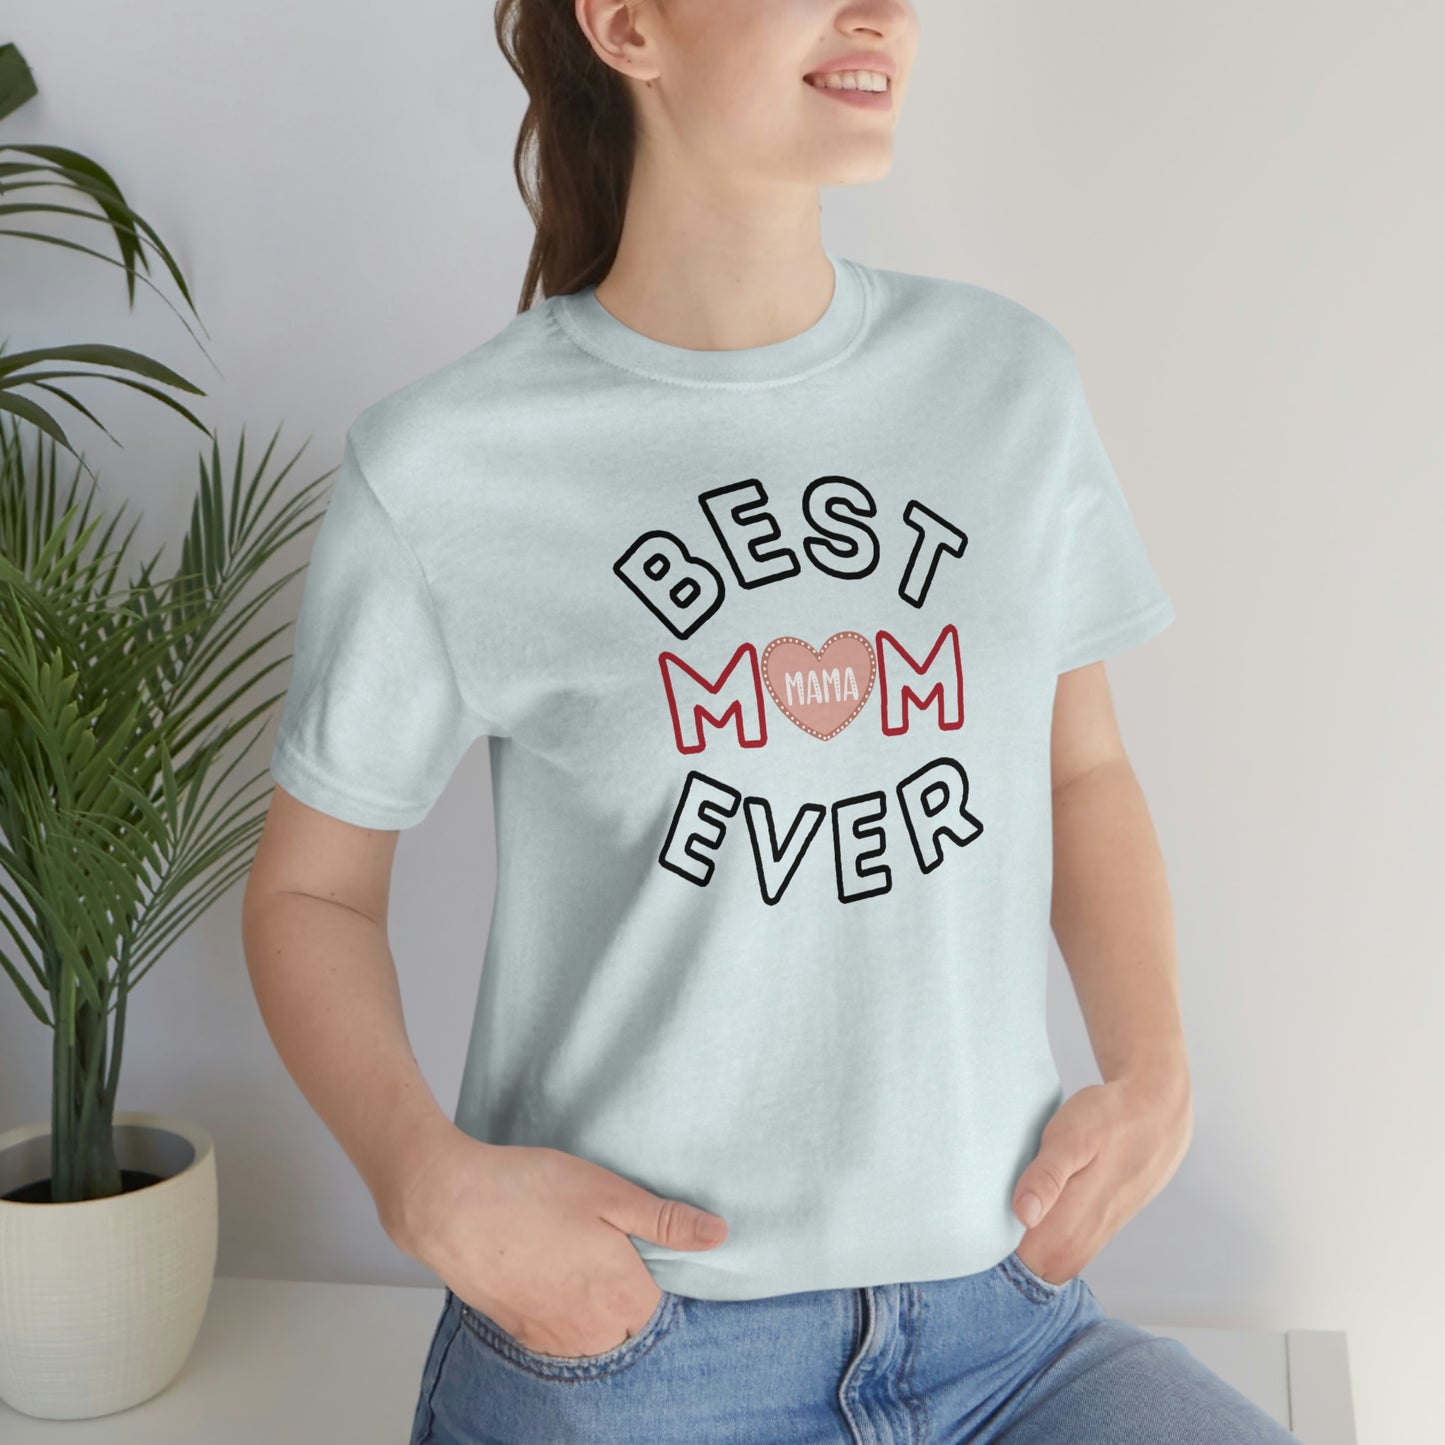 Best Mom Ever Shirt | Mothers day shirt | gift for mom | Mom birthday gift | Mothers day t shirts